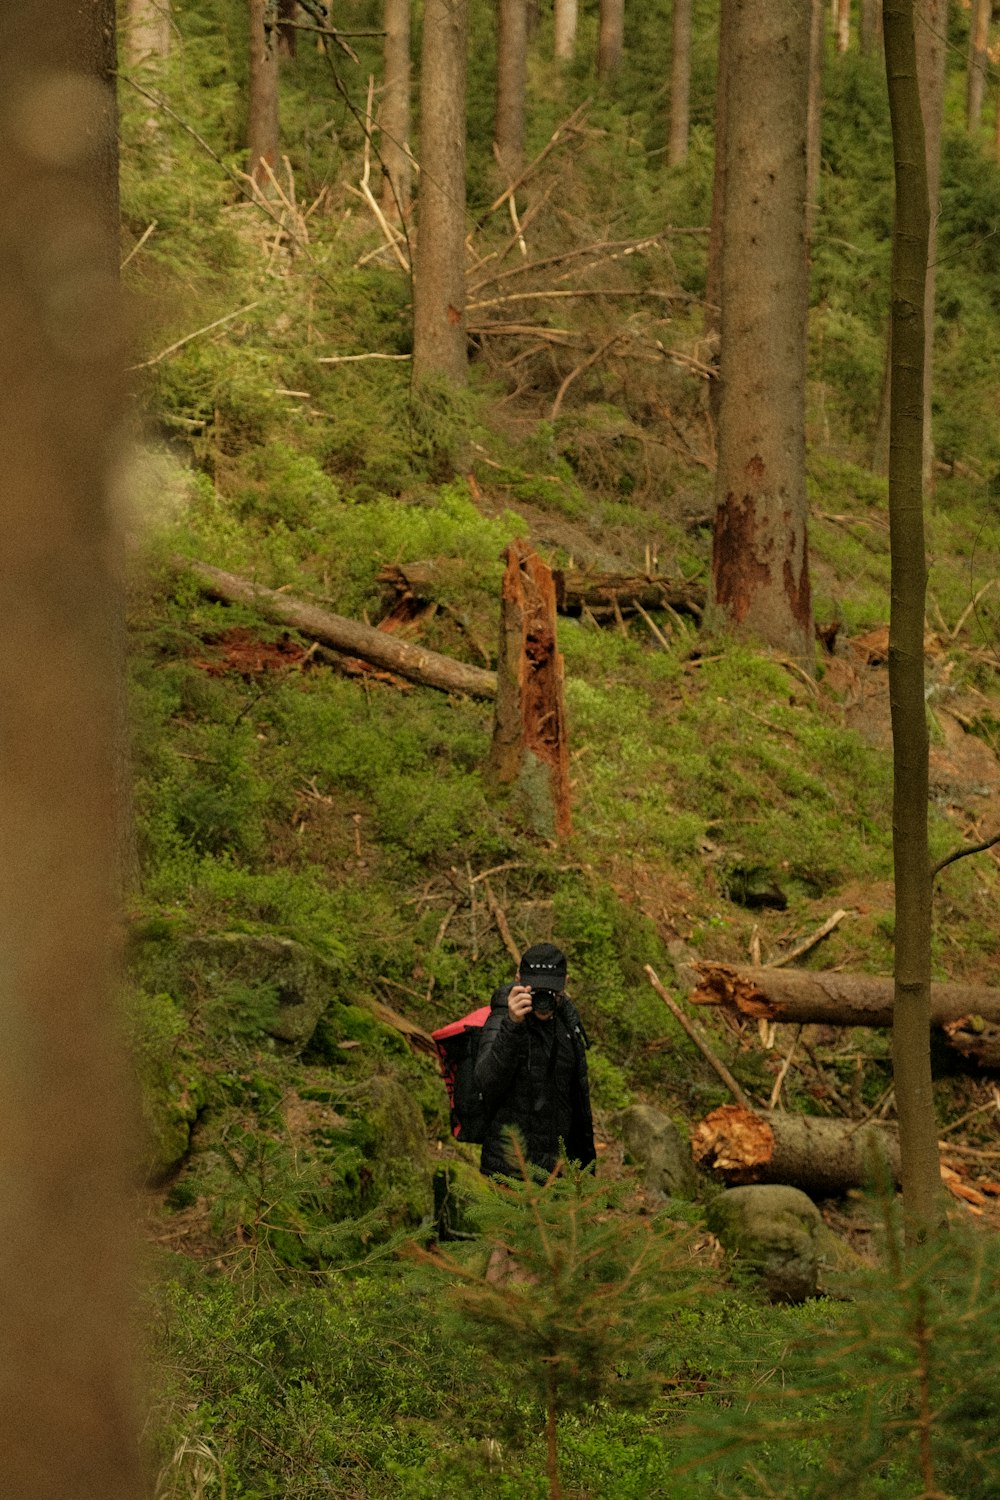 a person in a black jacket walking through a forest